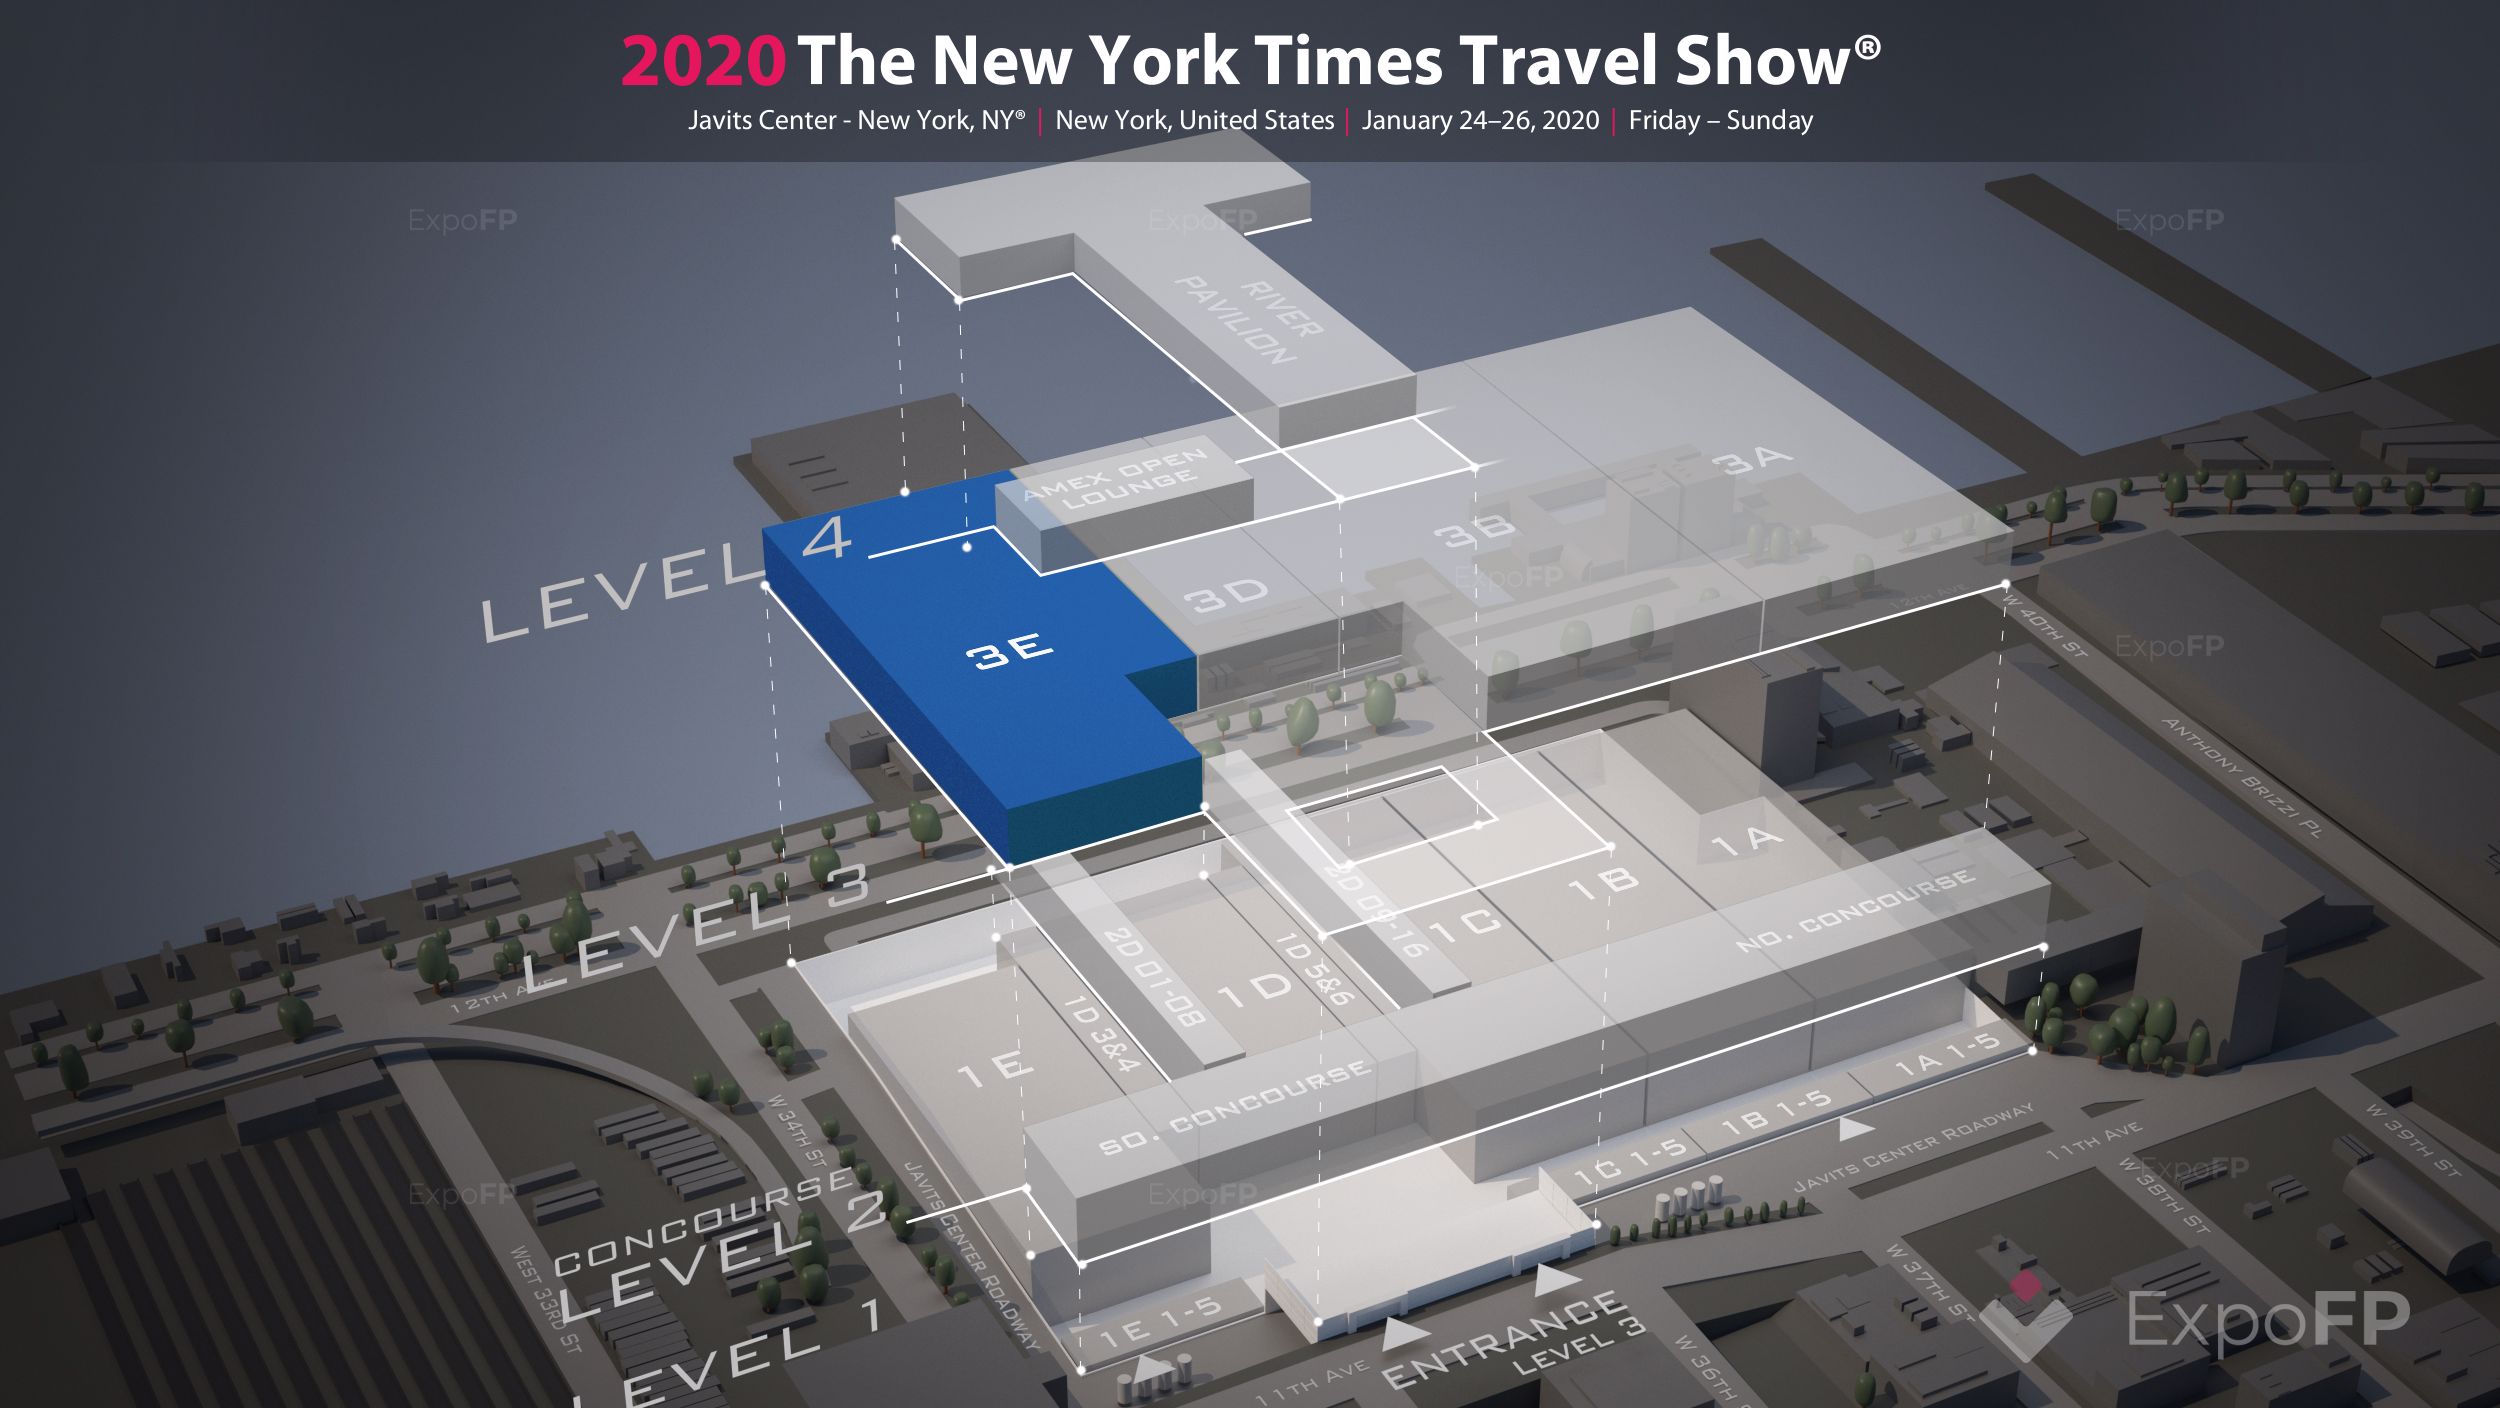 The New York Times Travel Show 2020 In Javits Center New York Ny,Blue And White Bathroom Decorating Ideas